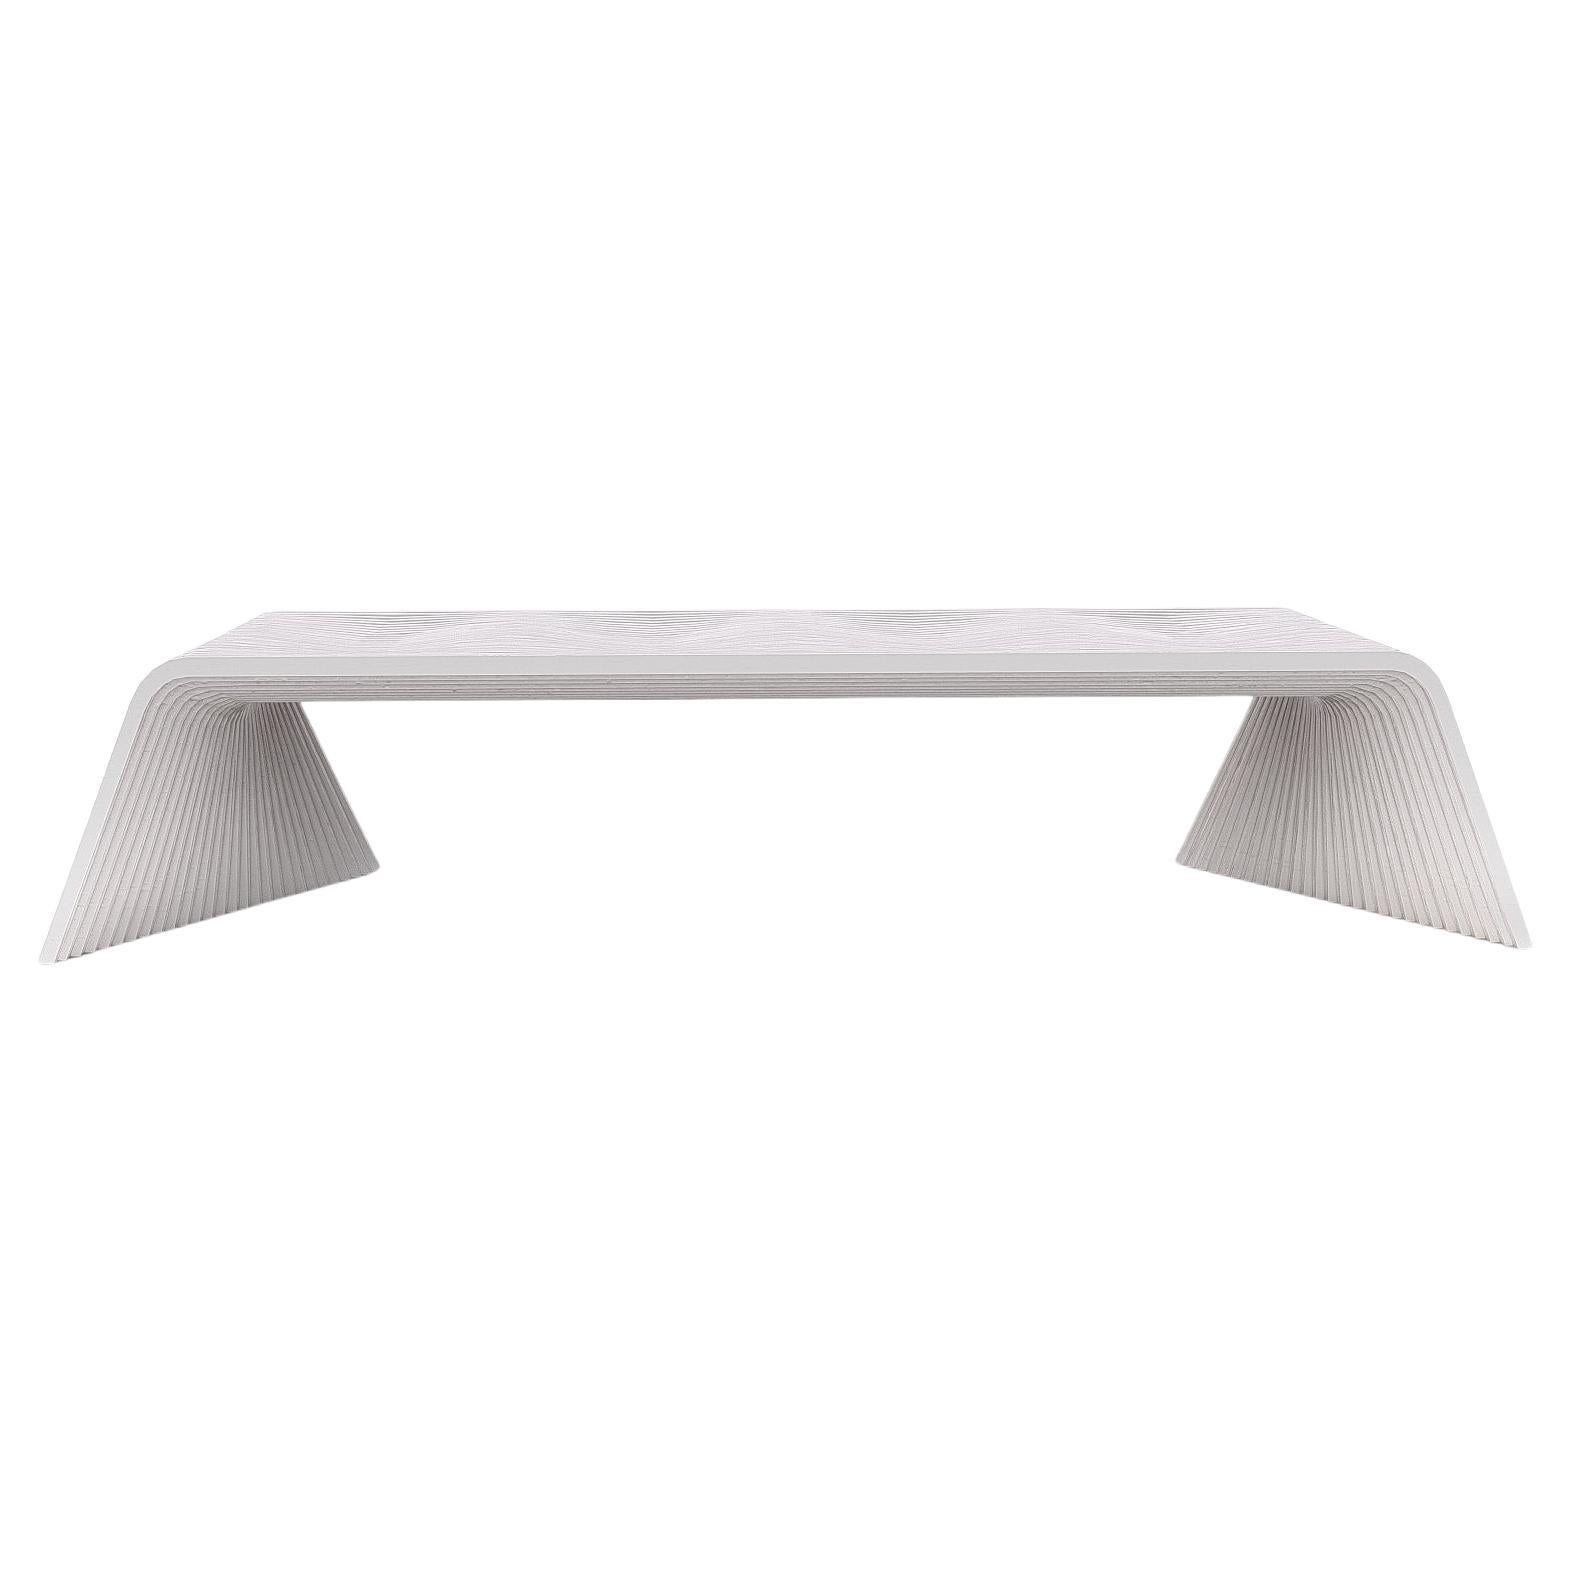 Sweep Bench Small by Piegatto, a Sculptural Contemporary Bench  For Sale